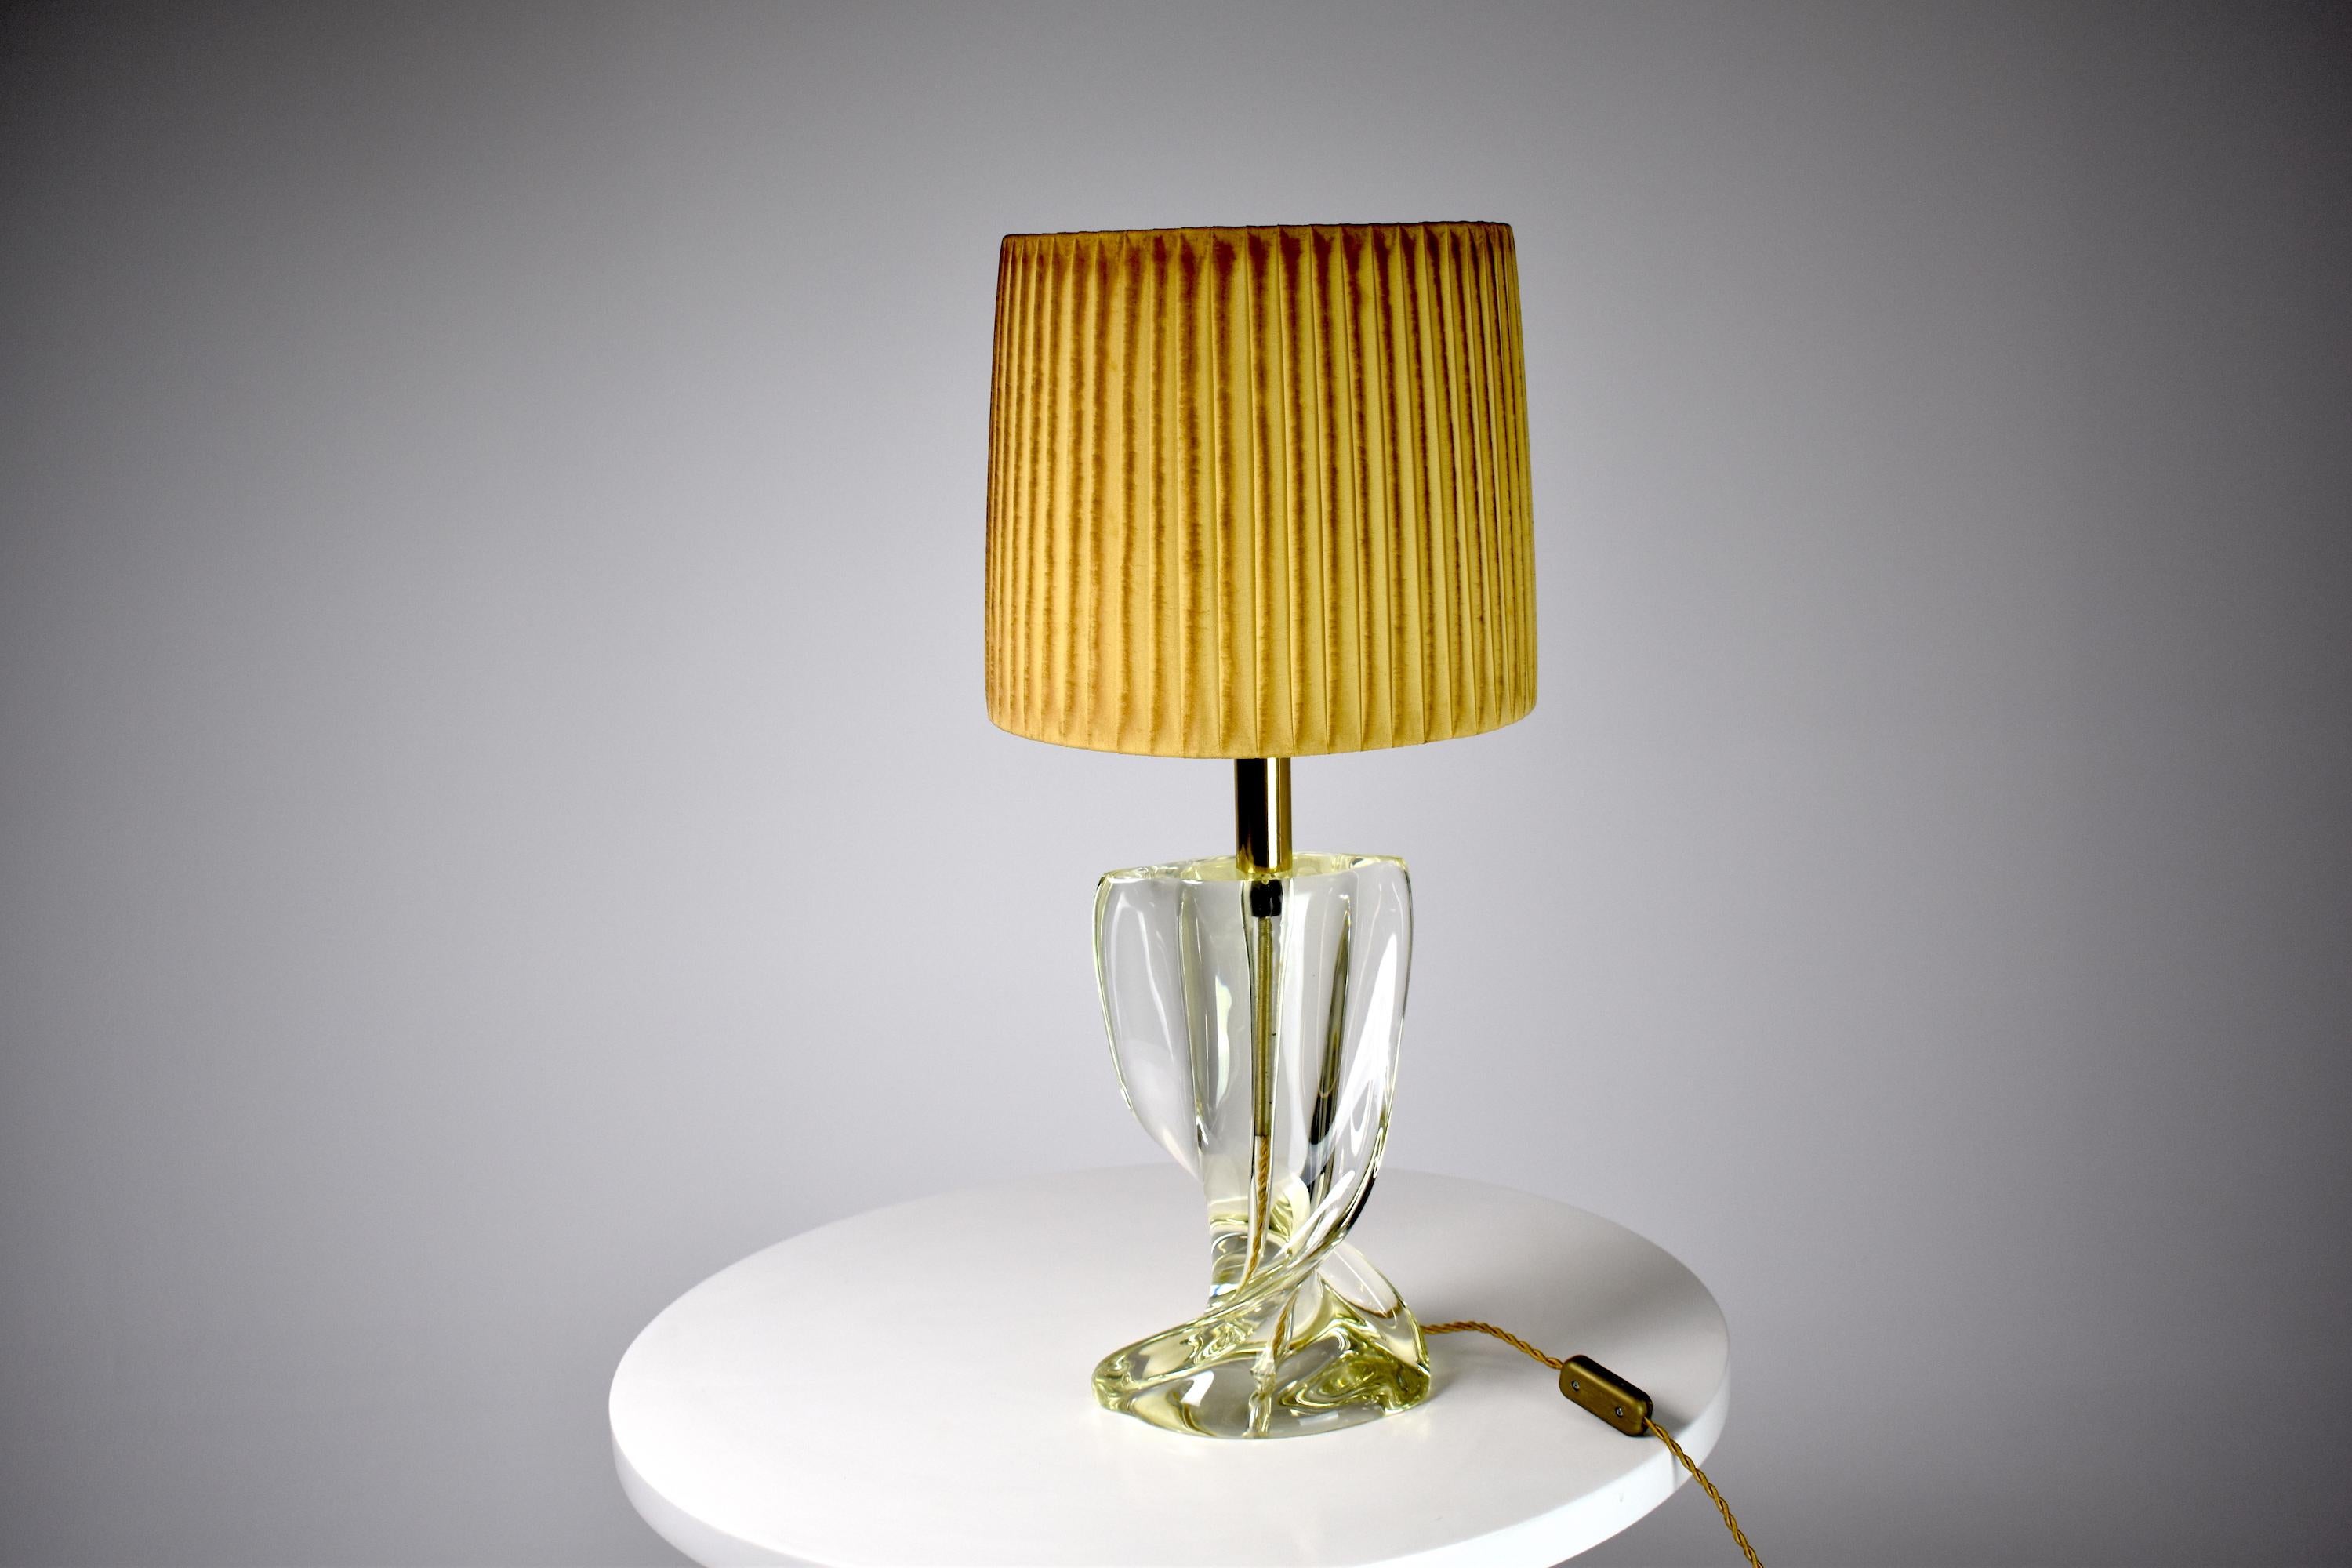 A French 20th-century vintage statement table lamp from the 1960's period built out of sculptural crystal and in fully restored condition: new hand-tinted pleated fabric gold cylindrical shade, a polished brass stem, and new cable cold rewiring. Its